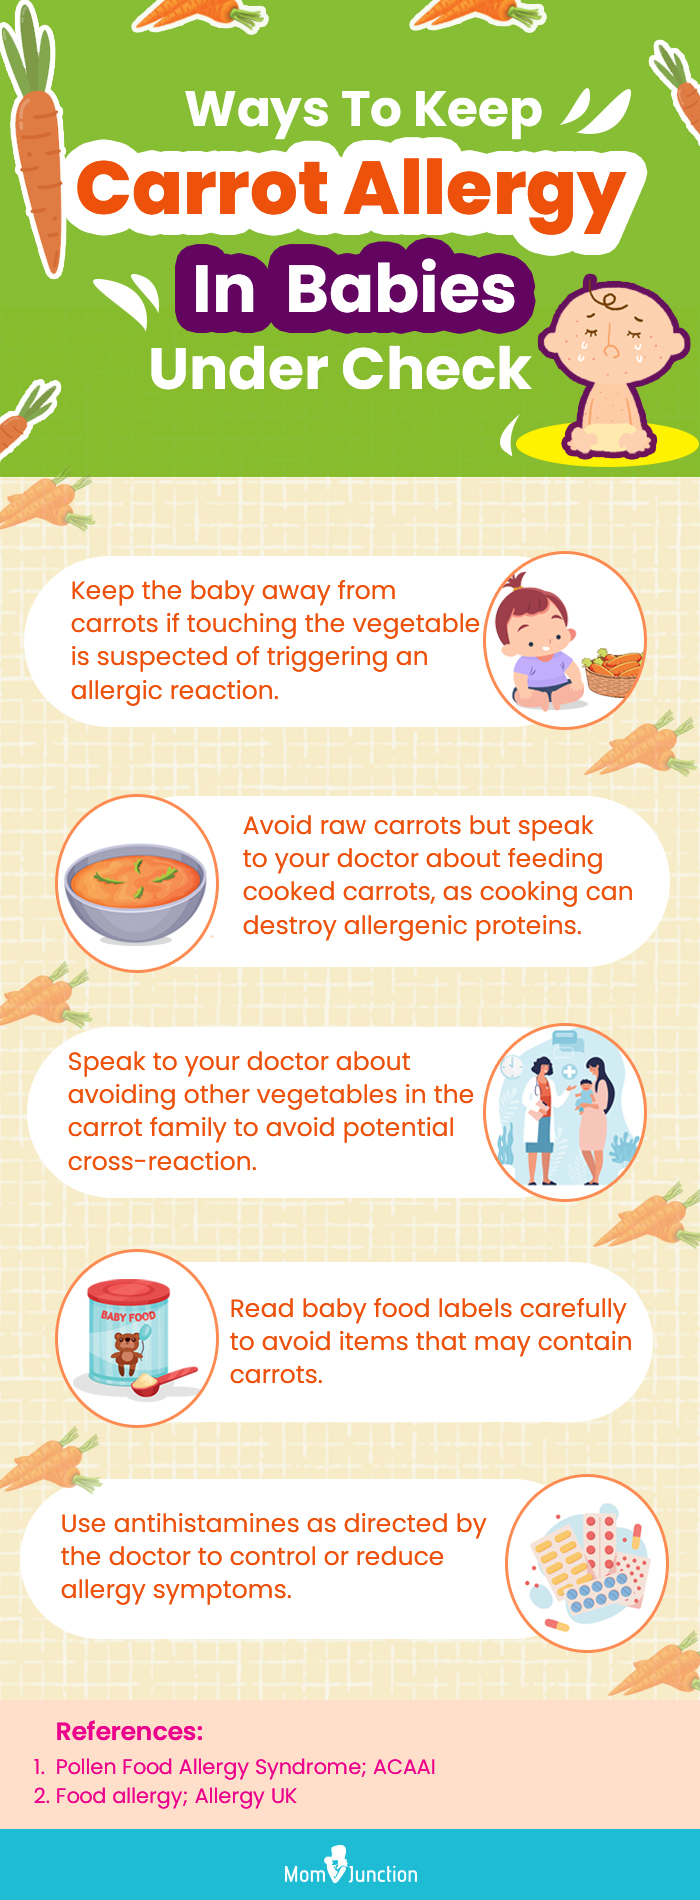 ways to keep carrot allergy in babies under check (infographic)